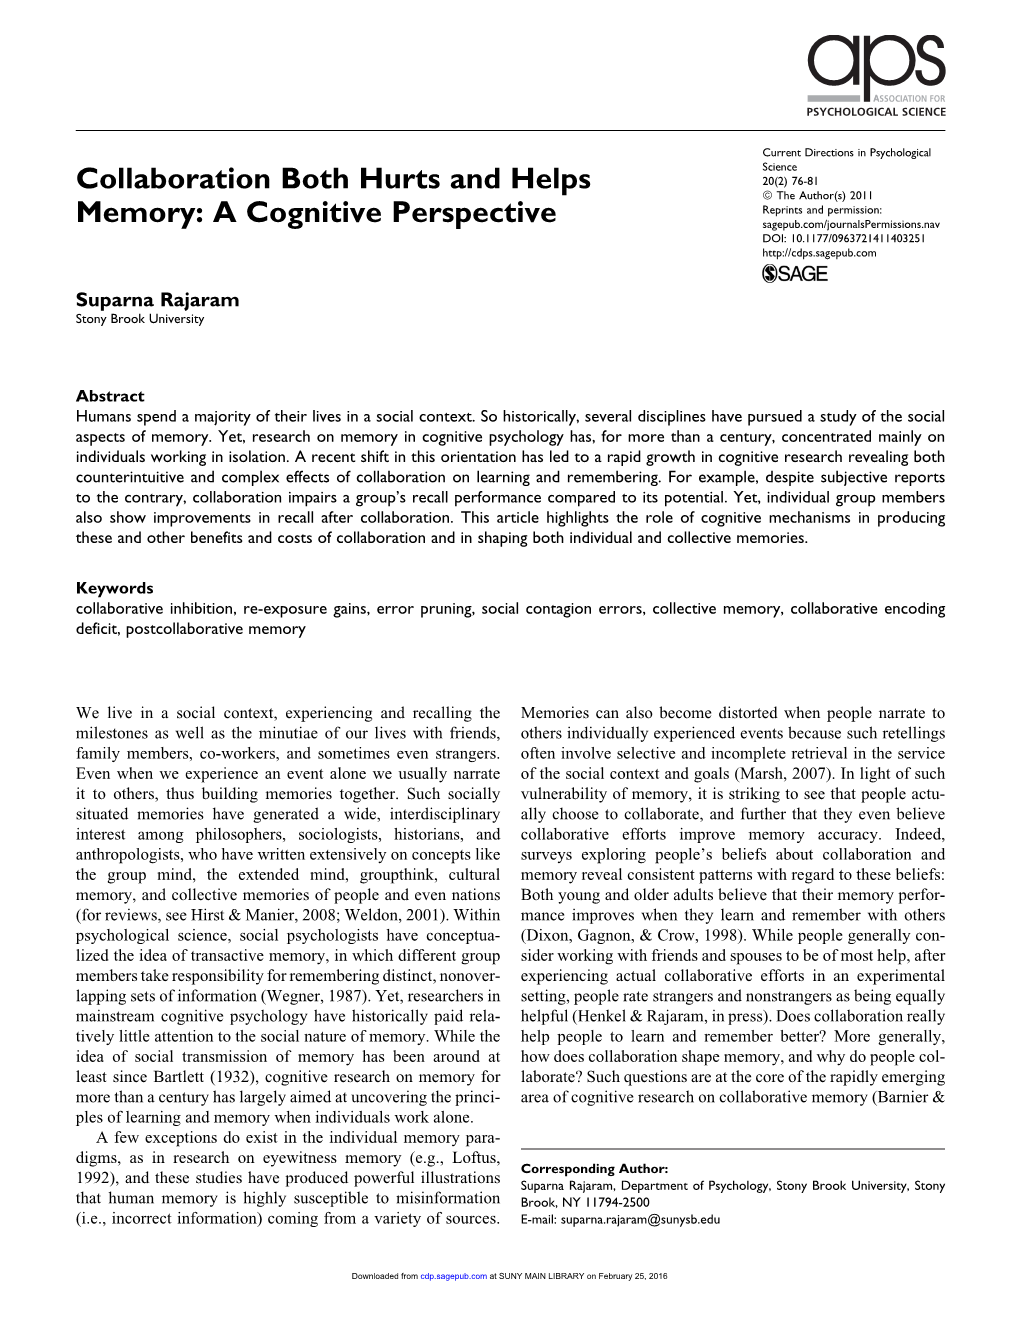 Collaboration Both Hurts and Helps Memory: a Cognitive Perspective